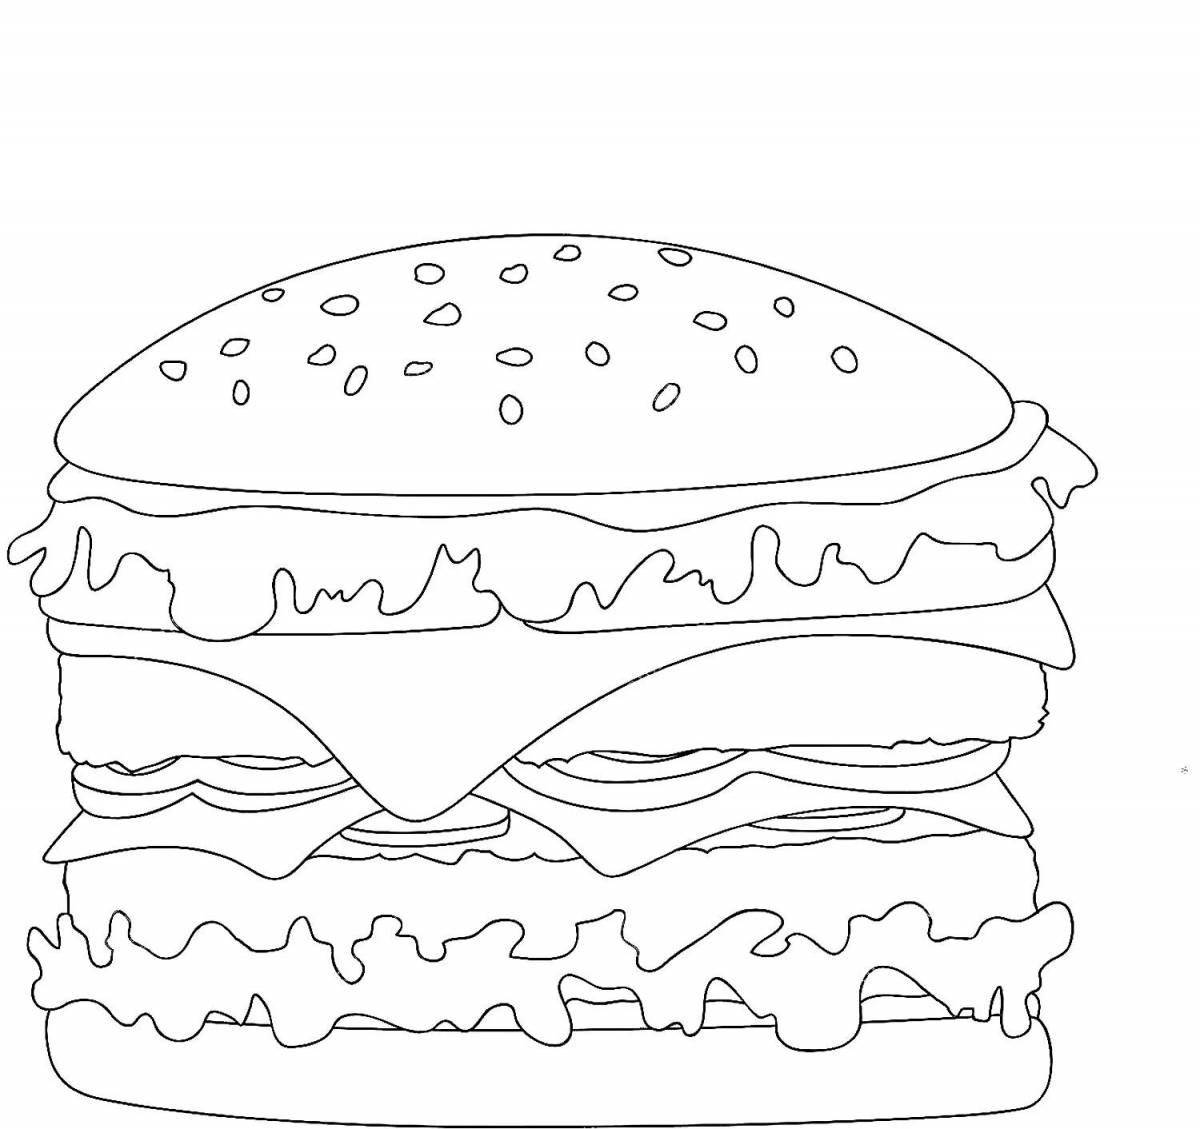 Adorable burger cat coloring page